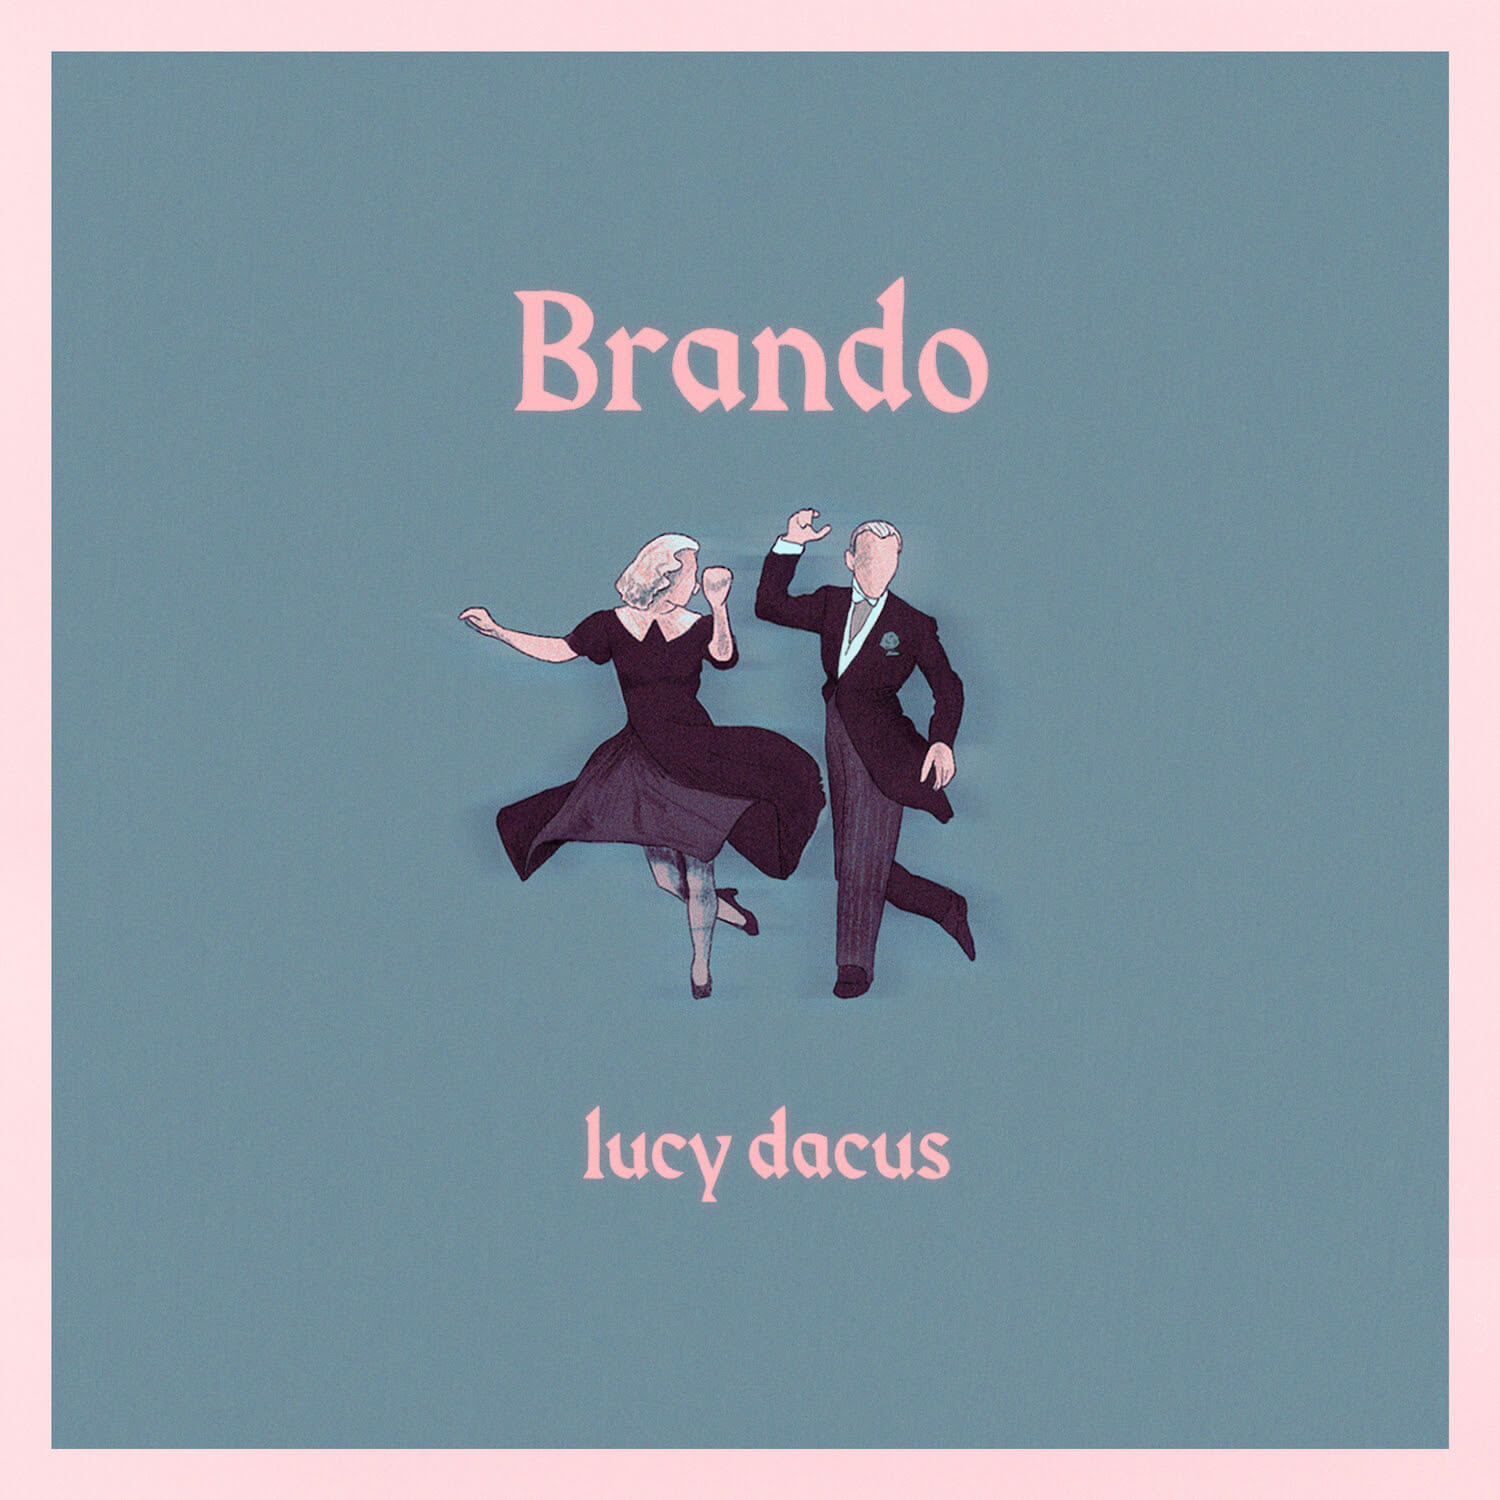 Matador recording artist Lucy Dacus, has shared a visualizer for "Brando," the track is off her LP Home Video, which drops on 25, 2021